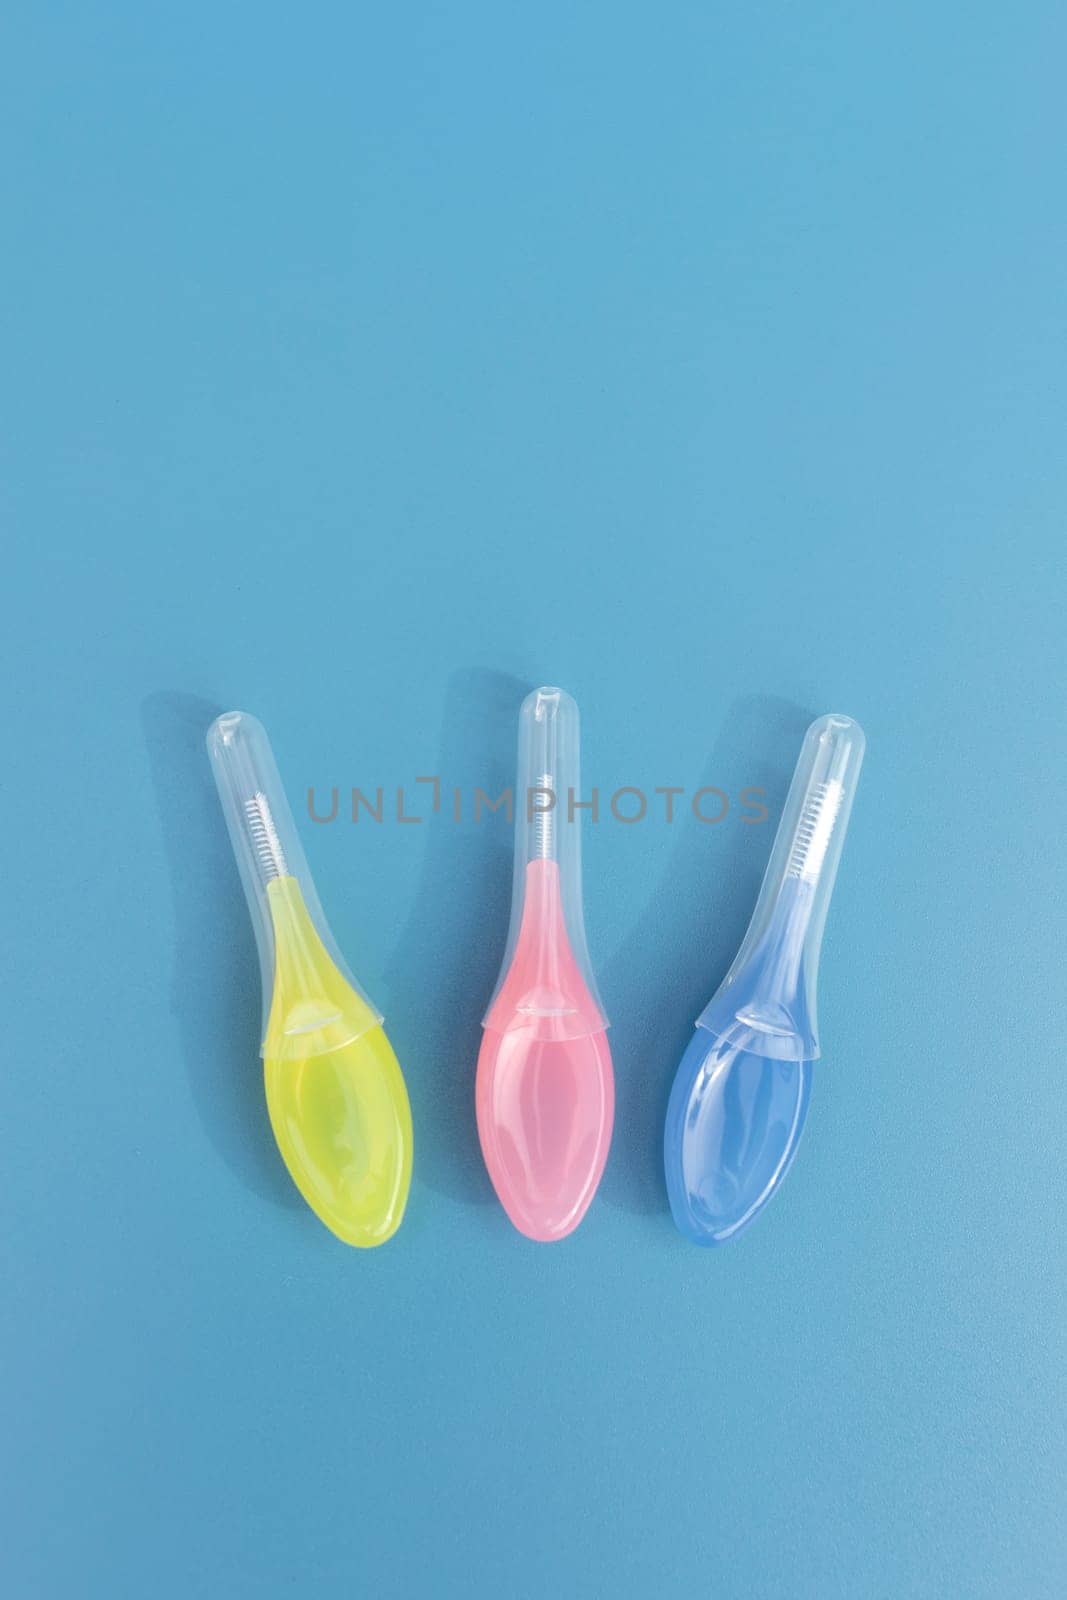 Template Colorful Dental Brushes Between Teeth Gum Braces on Blue Background, Interdental Brush Toothpick with Soft Bristles, Oral Tooth Cleaning Tool. Vertical Plane, Copy Space For Text by netatsi